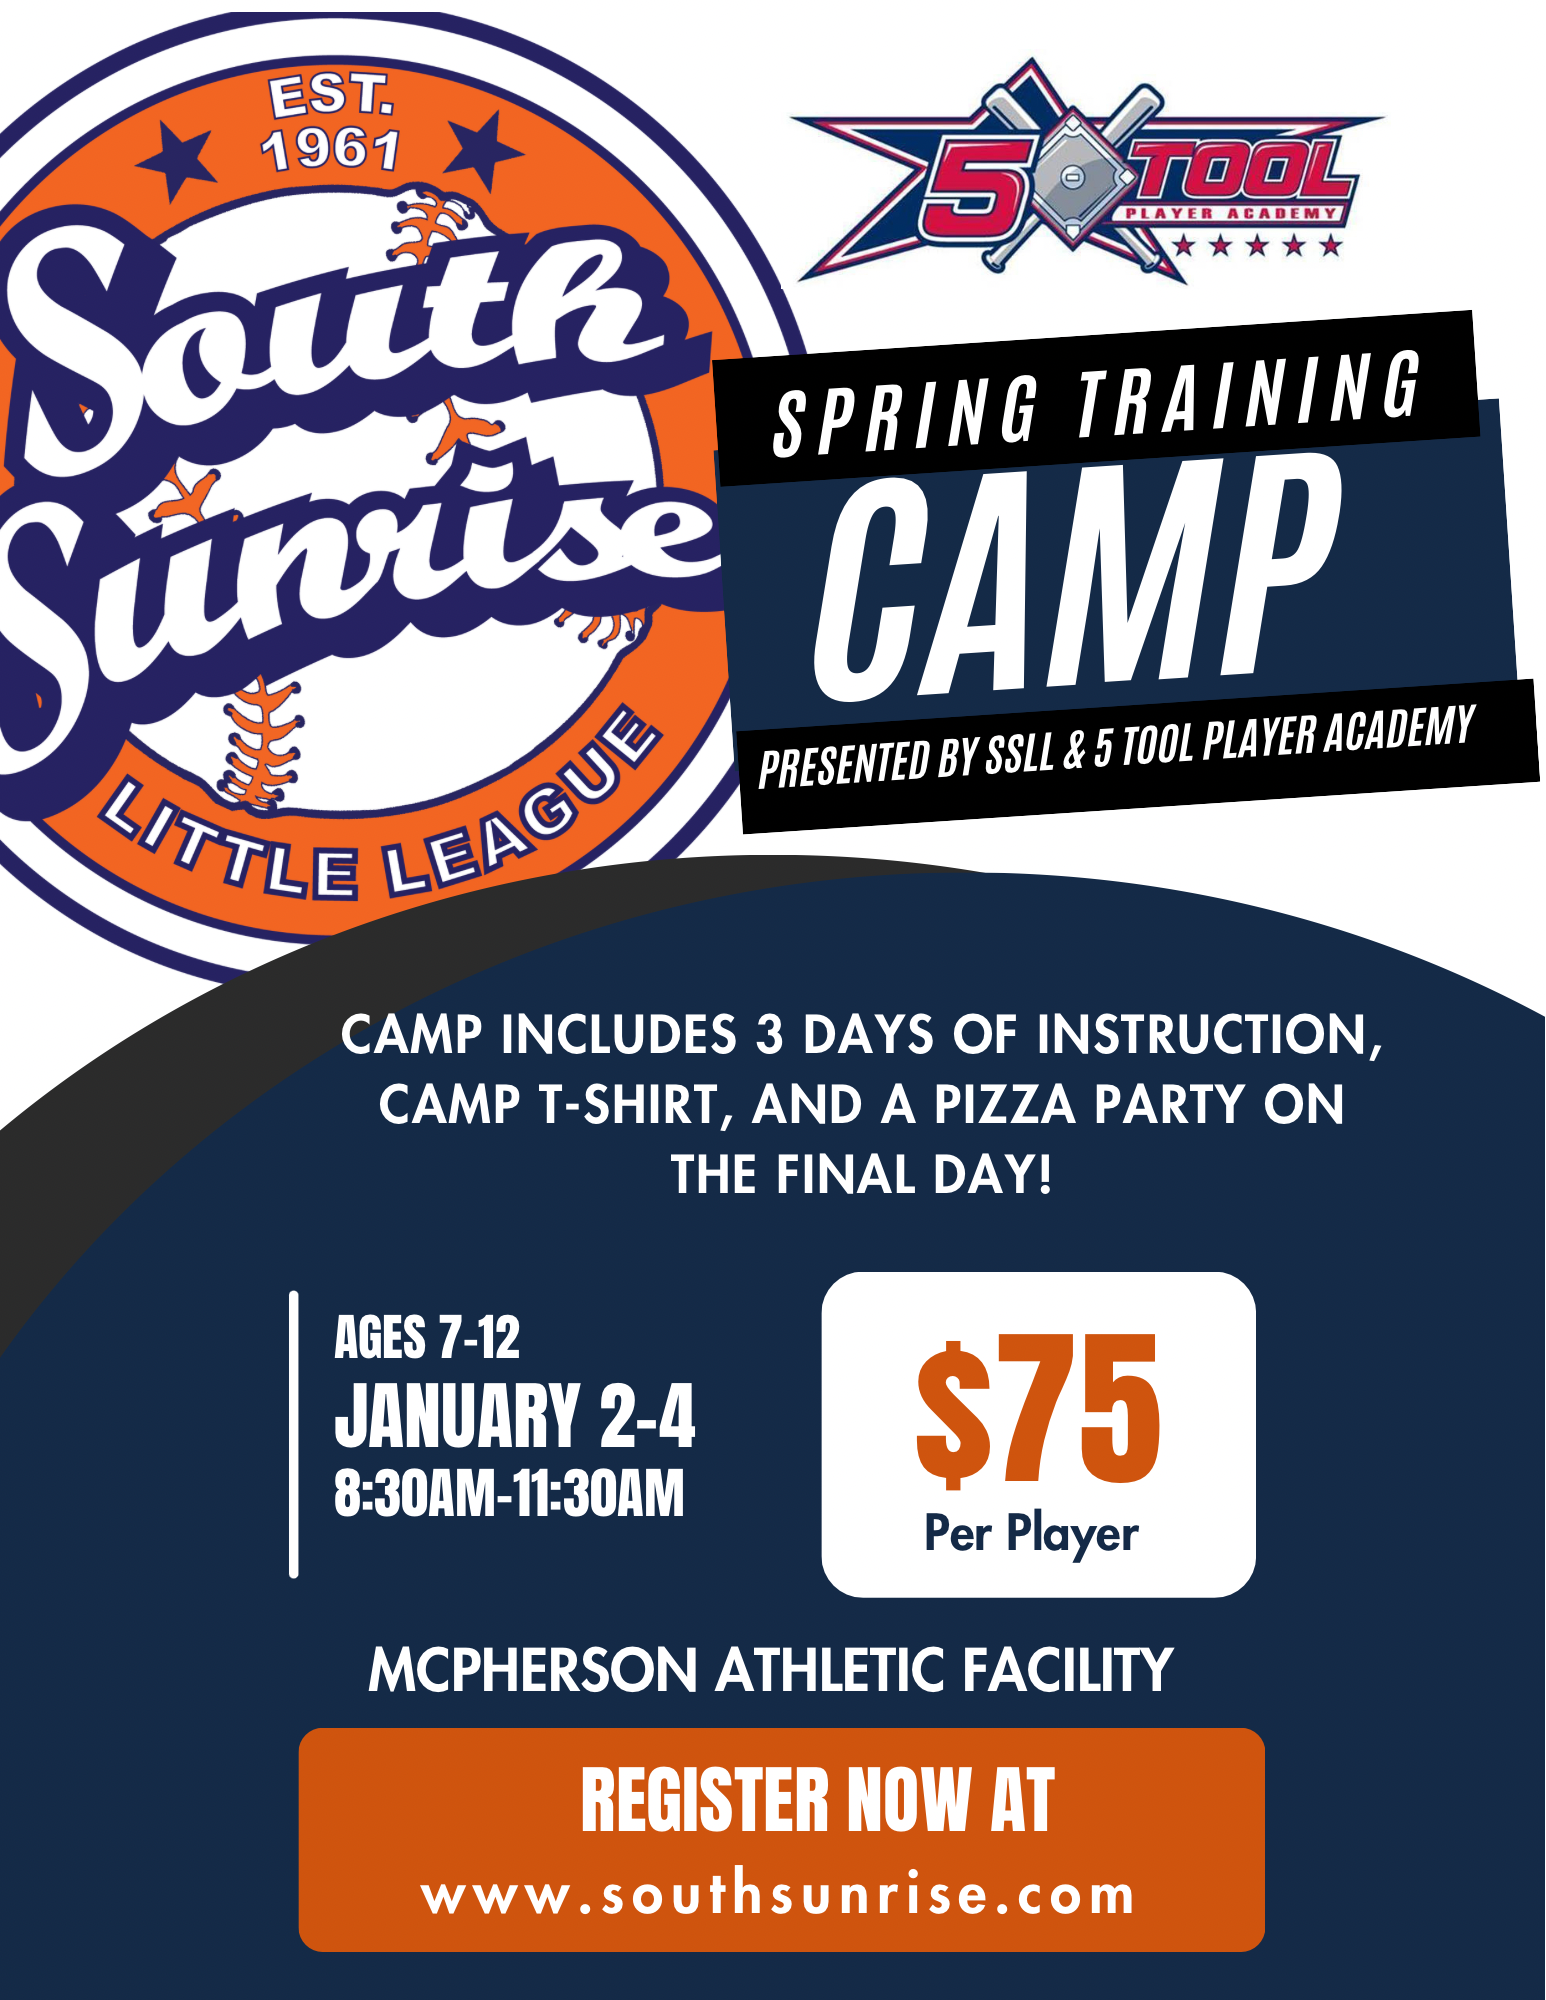 Sign up now for our Spring Training Camp!